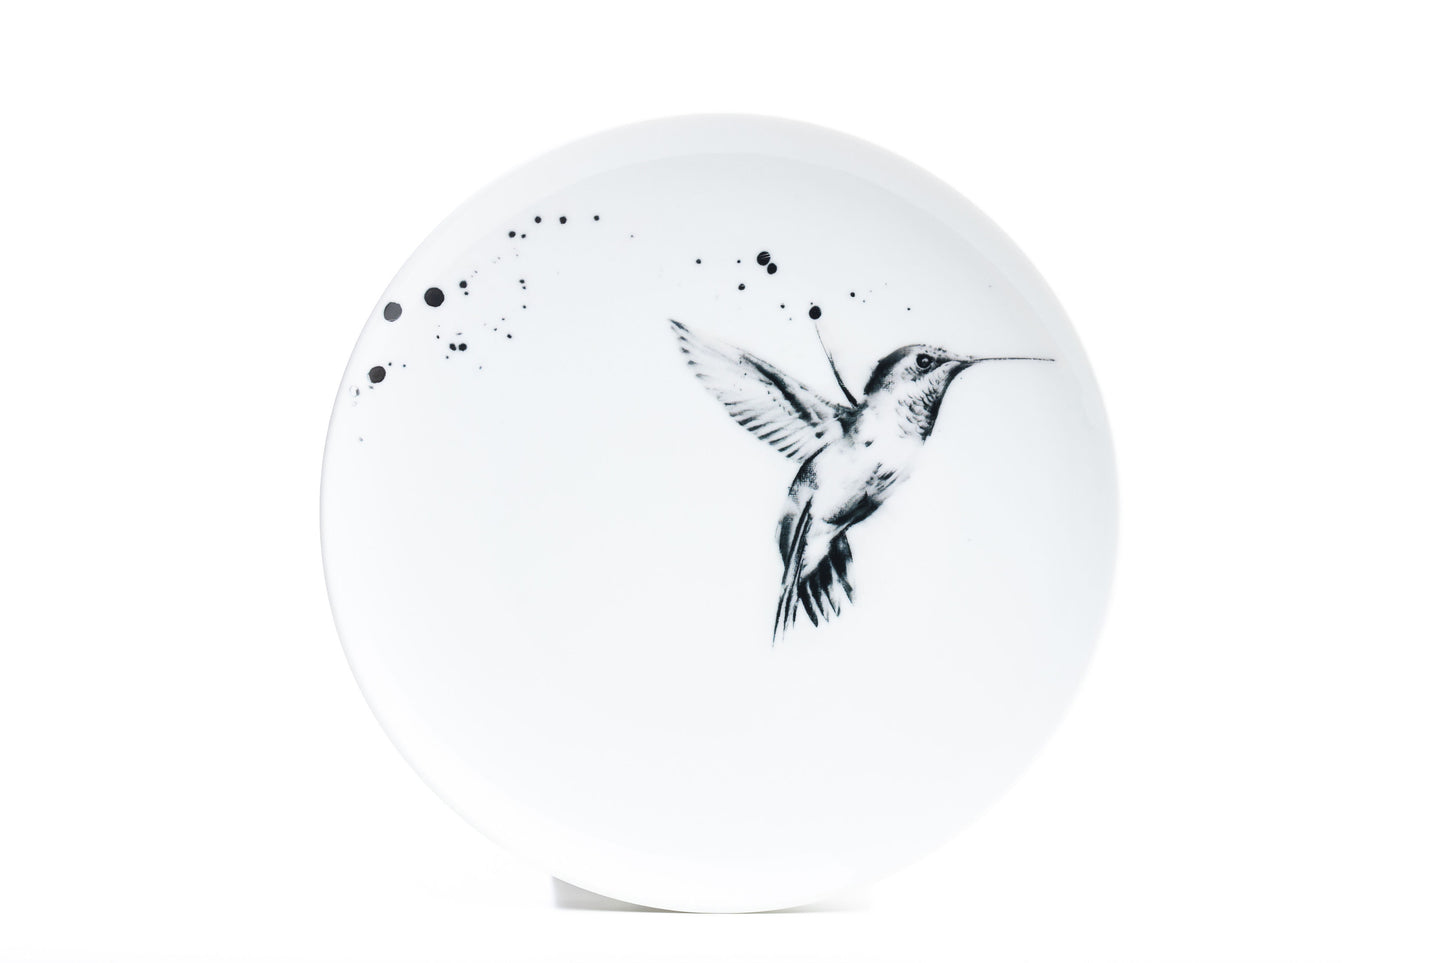 11" White coupe porcelain dinner plate with hummingbird in flight illustration and black ink splatter product photo on white background